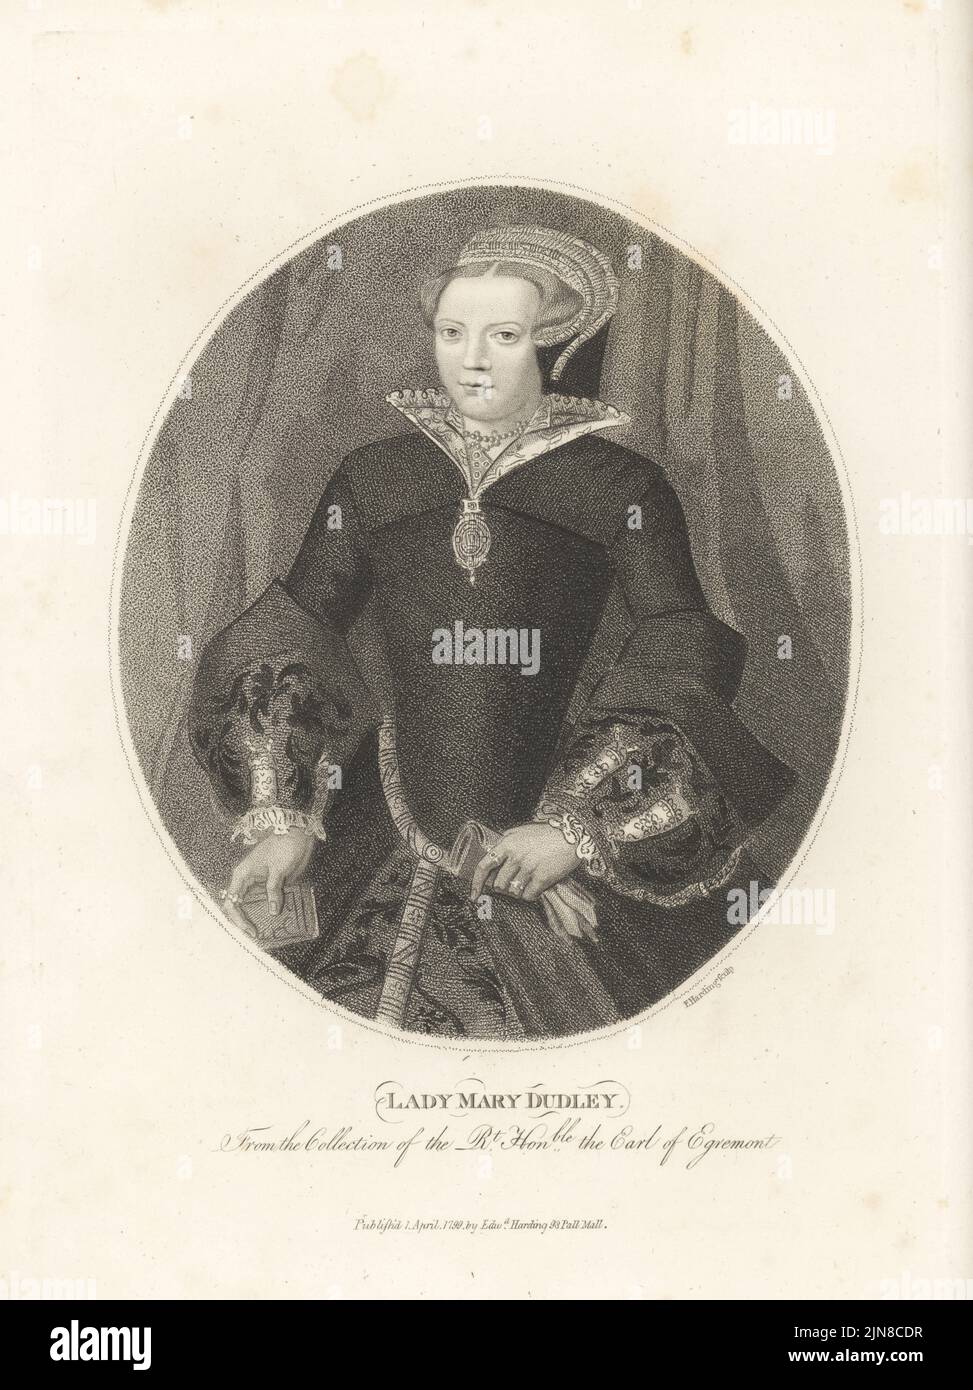 Lady Mary Sidney, lady-in-waiting at the court of Queen Elizabeth I, wife of Sir Henry Sidney, mother of Sir Philip Sidney and Mary Sidney Herbert, Countess of Pembroke, c. 1530-1586. In hooded headdress, lace collar, bodice with large embroidered cuffs, brocade skirts. Lady Mary Dudley. From a painting by Hans Eworth in the Earl of Egremont's collection at Petworth House, West Sussex. Copperplate engraving by Edward Harding from John Adolphus’ The British Cabinet, containing Portraits of Illustrious Personages, printed by T. Bensley for E. Harding, 98 Pall Mall, London, 1799. Stock Photo